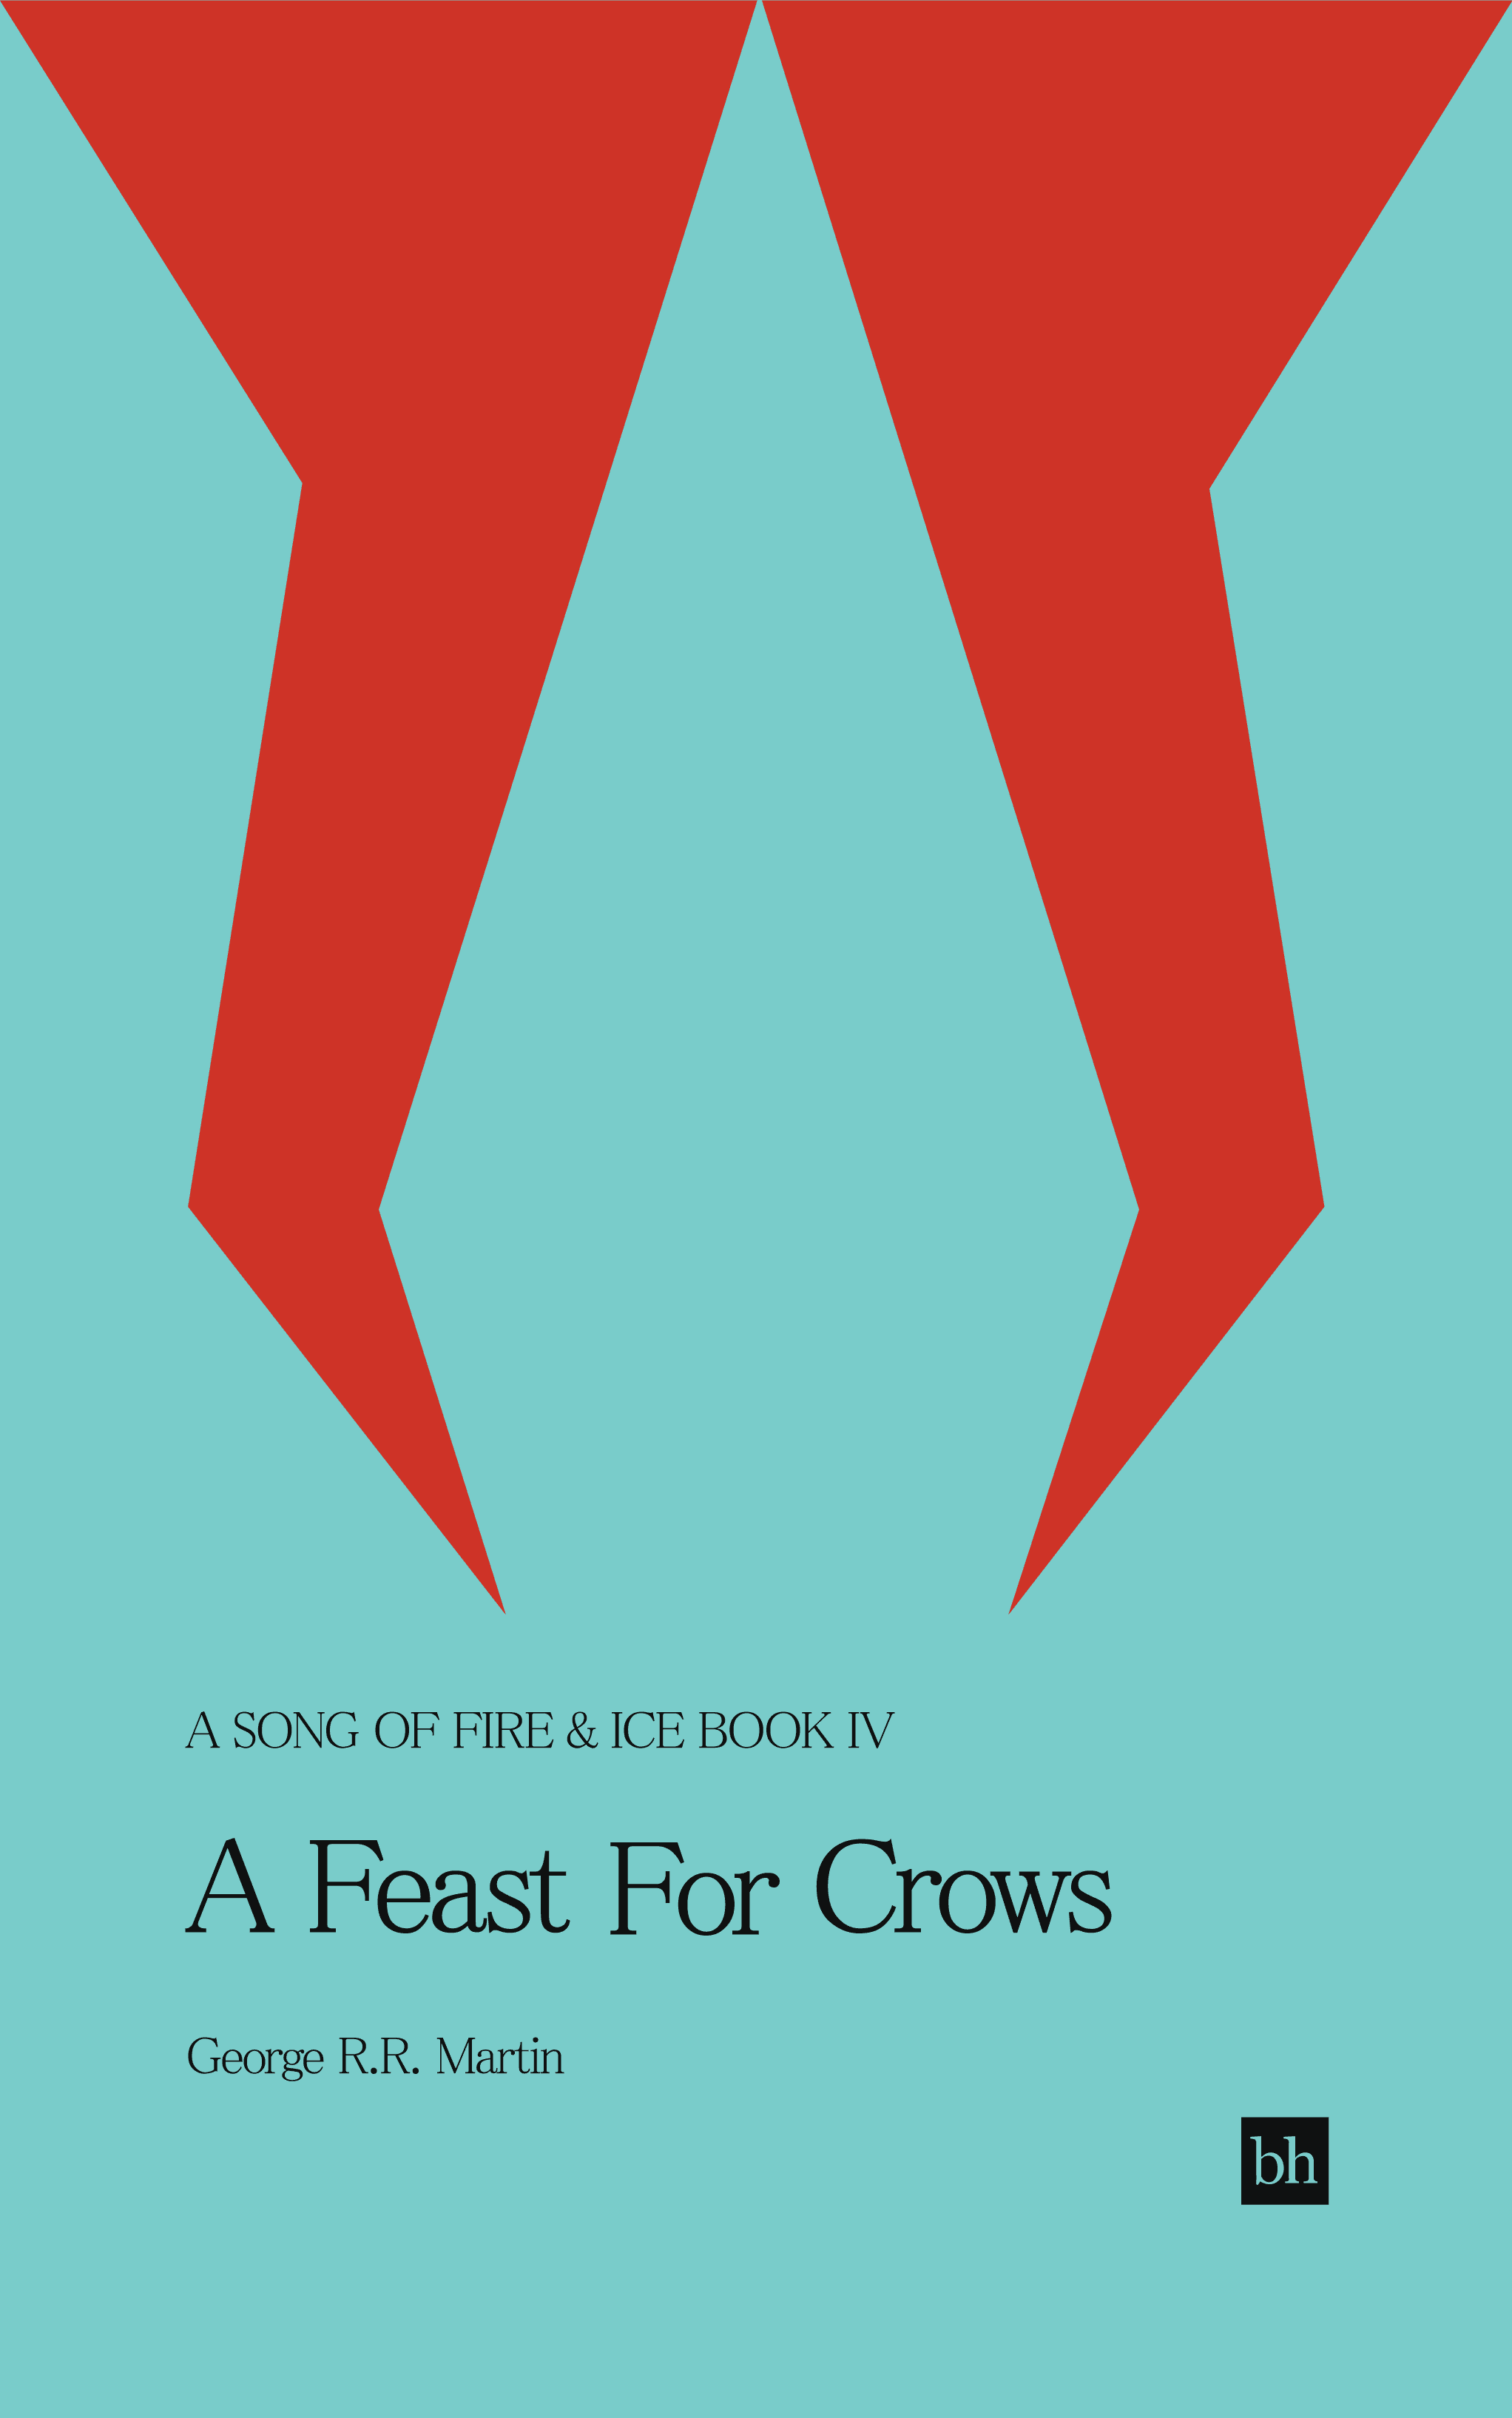 A Feast For Crows   by George R.R. Martin